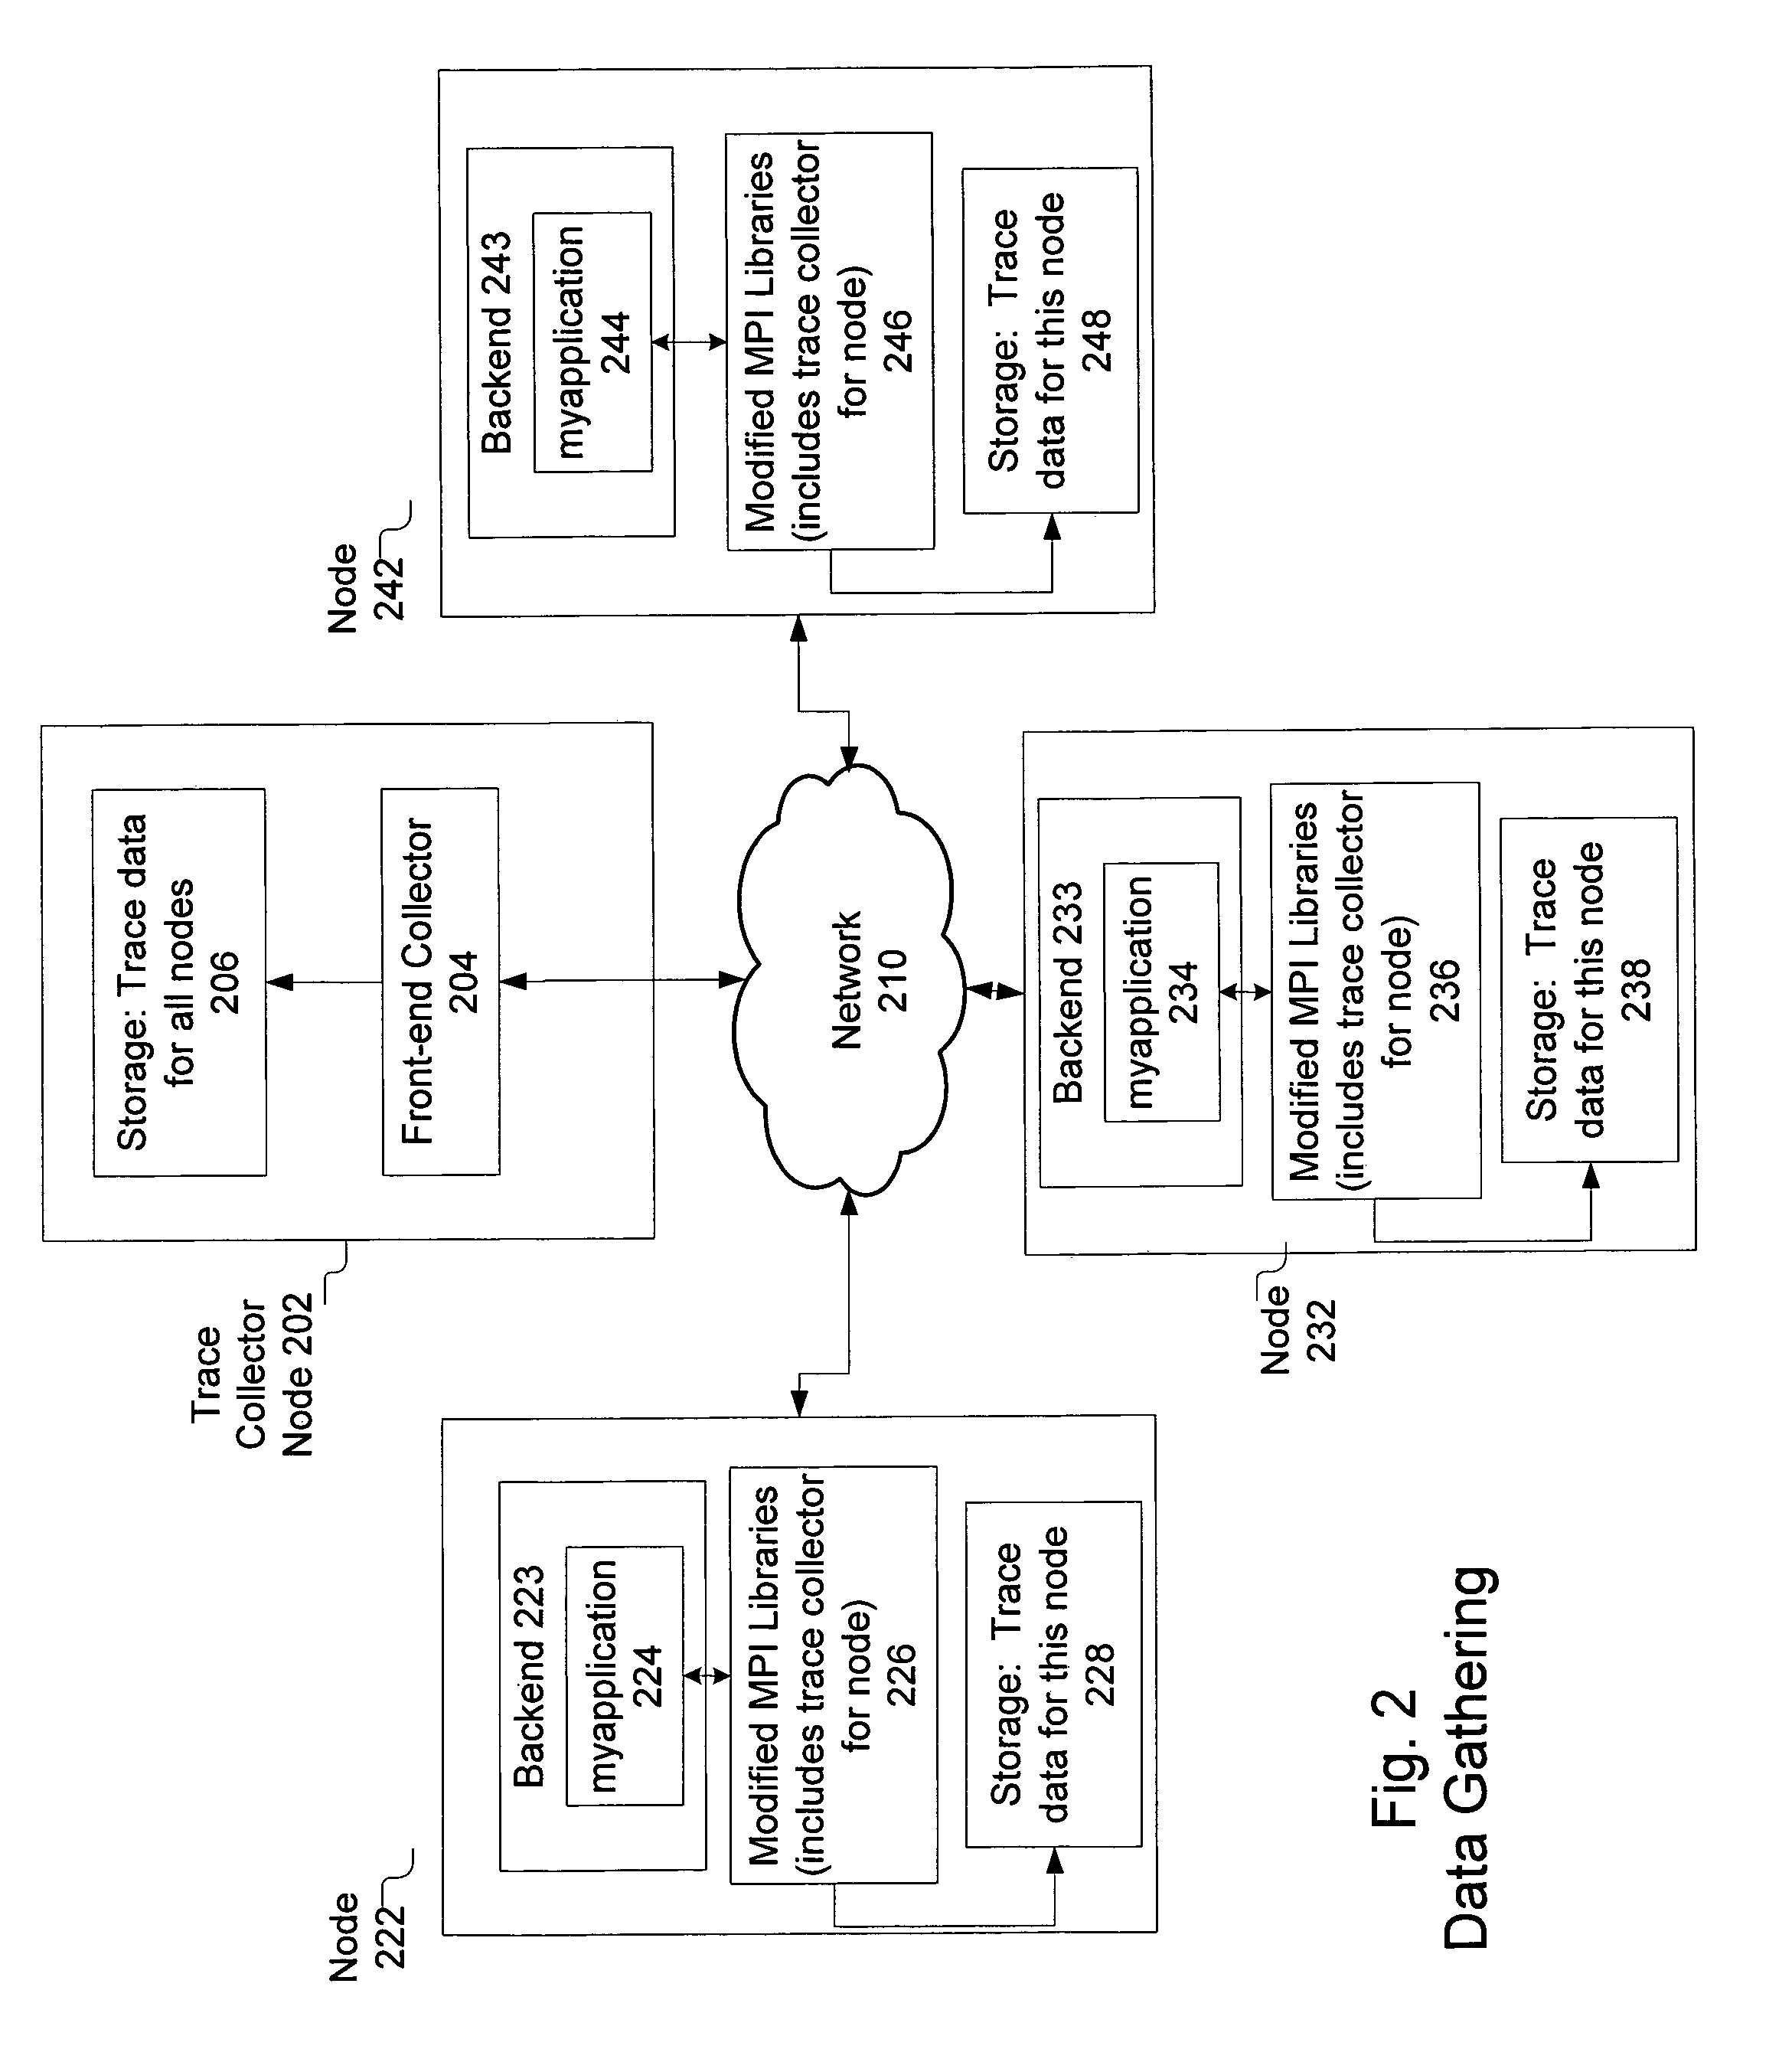 Clustered computing model and display